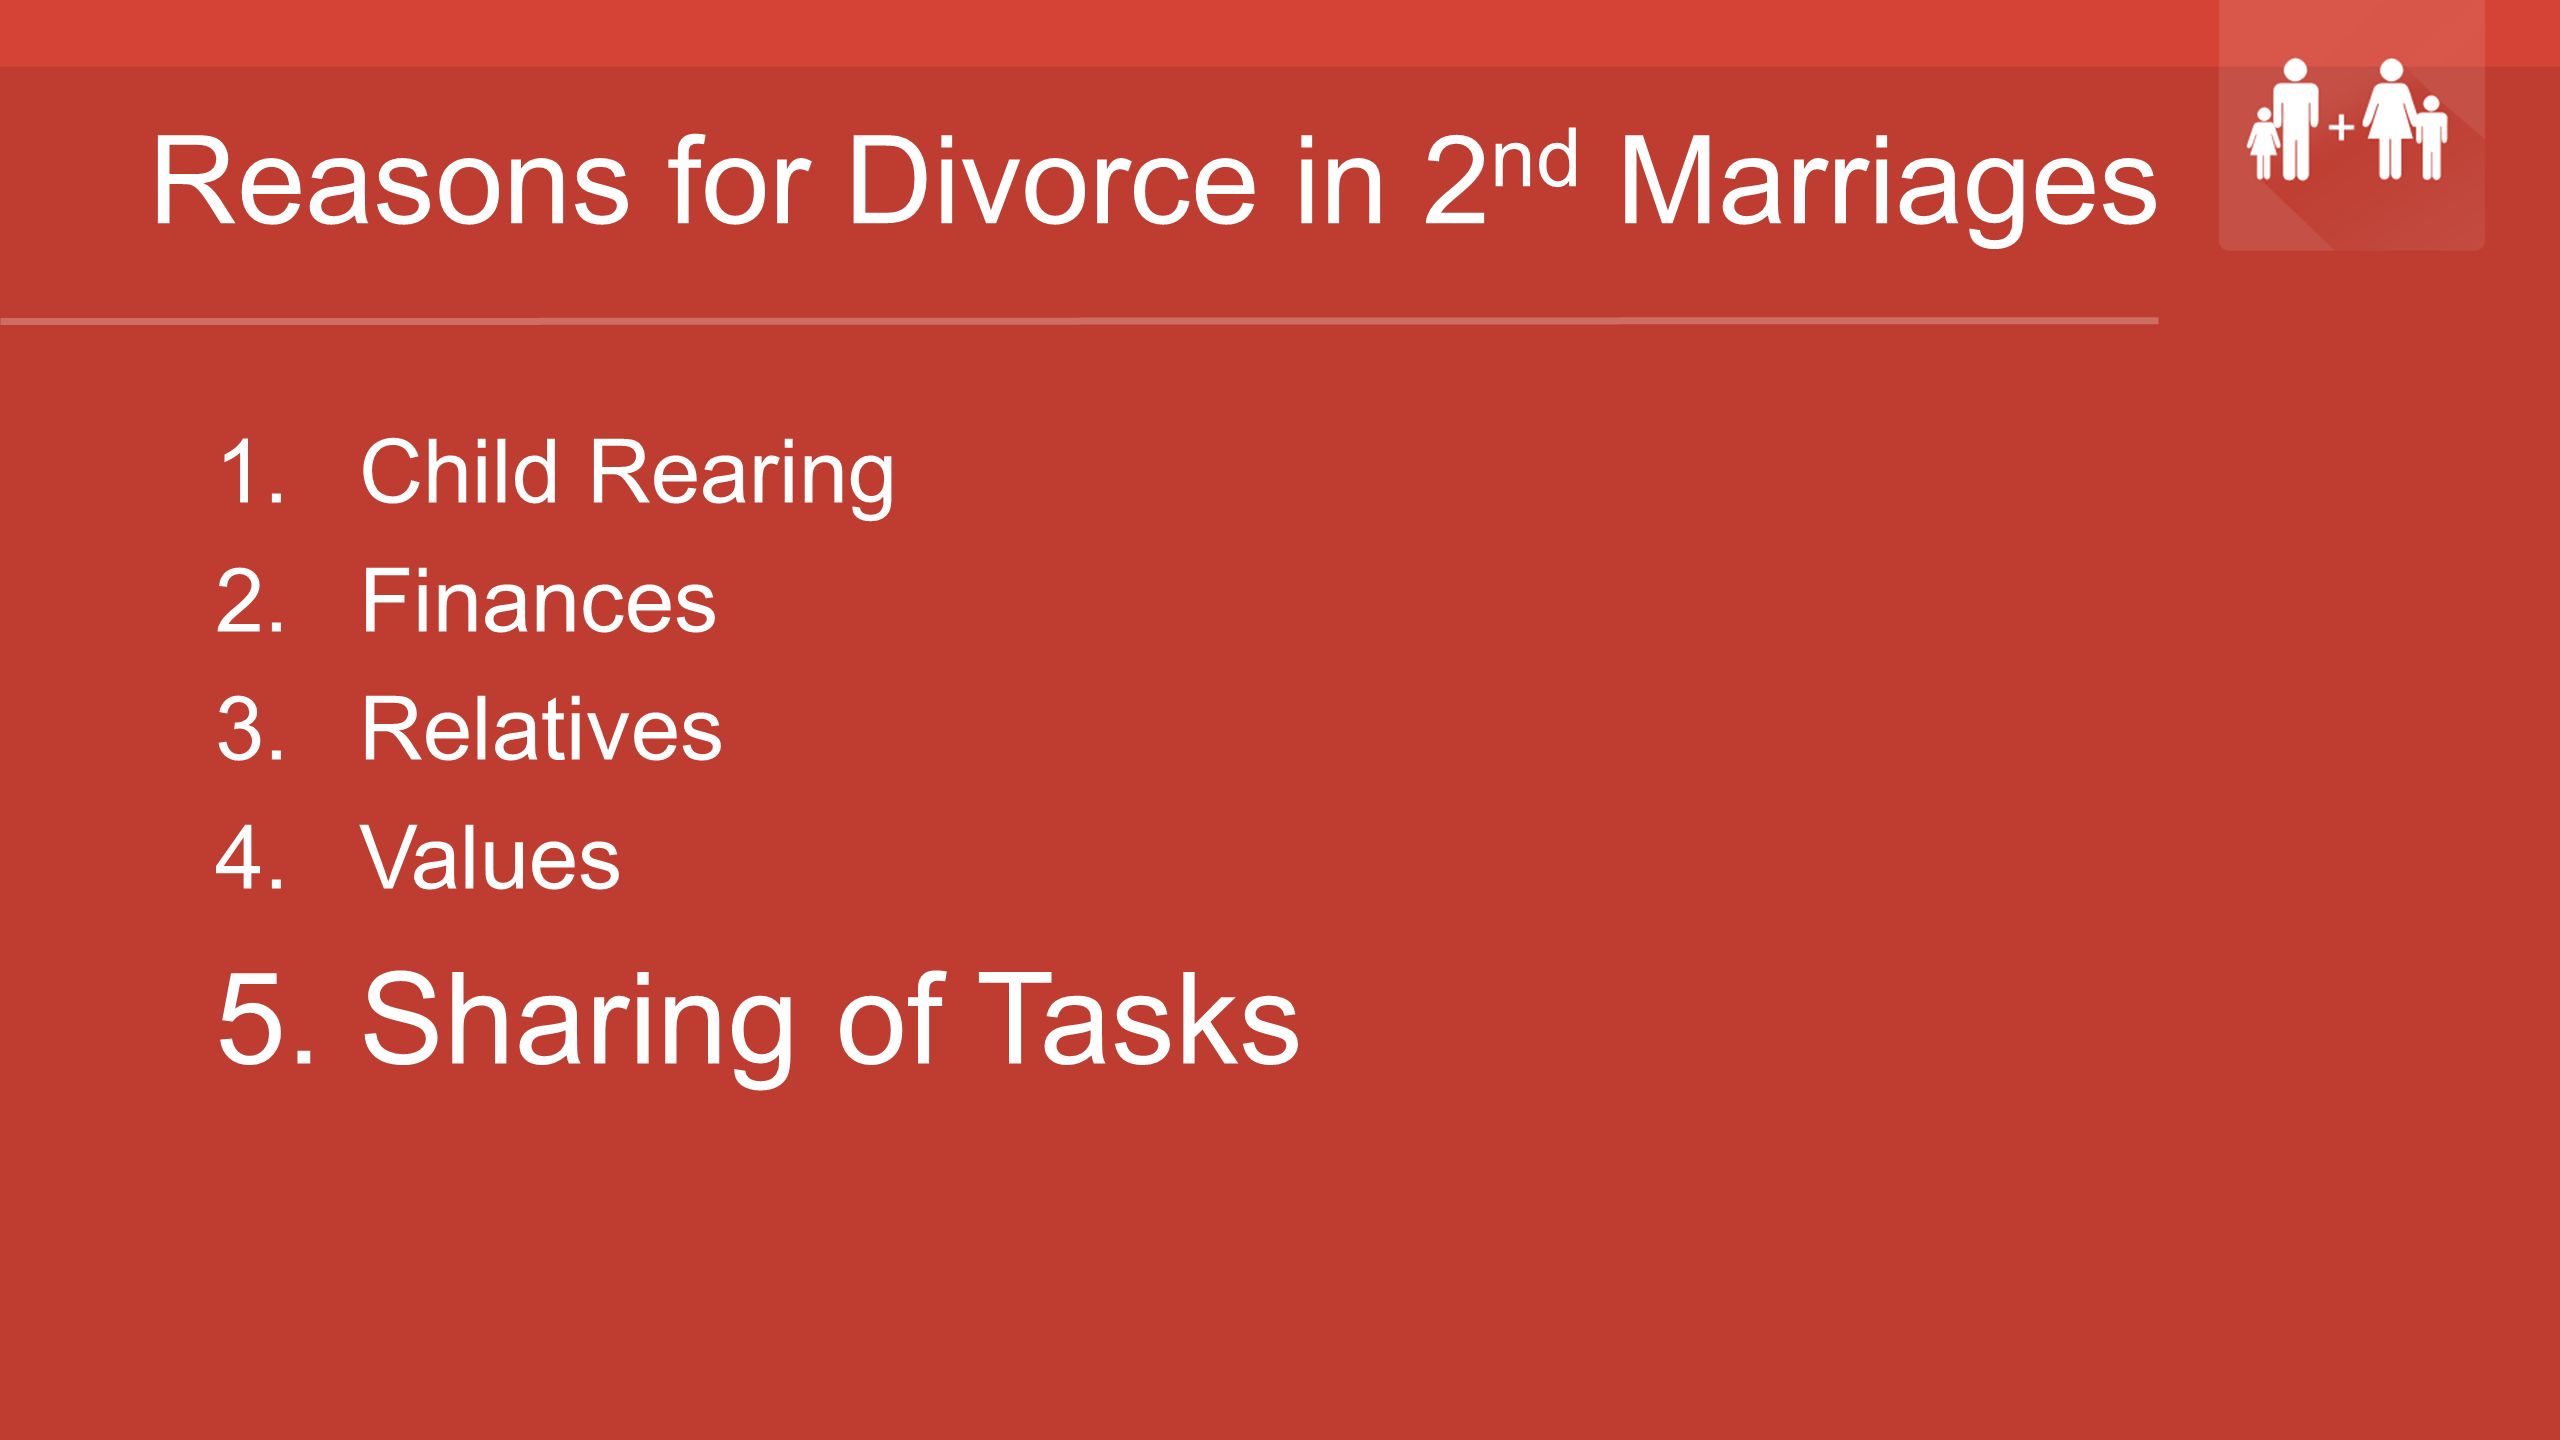 Reasons for Divorce in 2 nd Marriages 1.Child Rearing 2.Finances 3.Relatives 4.Values 5.Sharing of Tasks